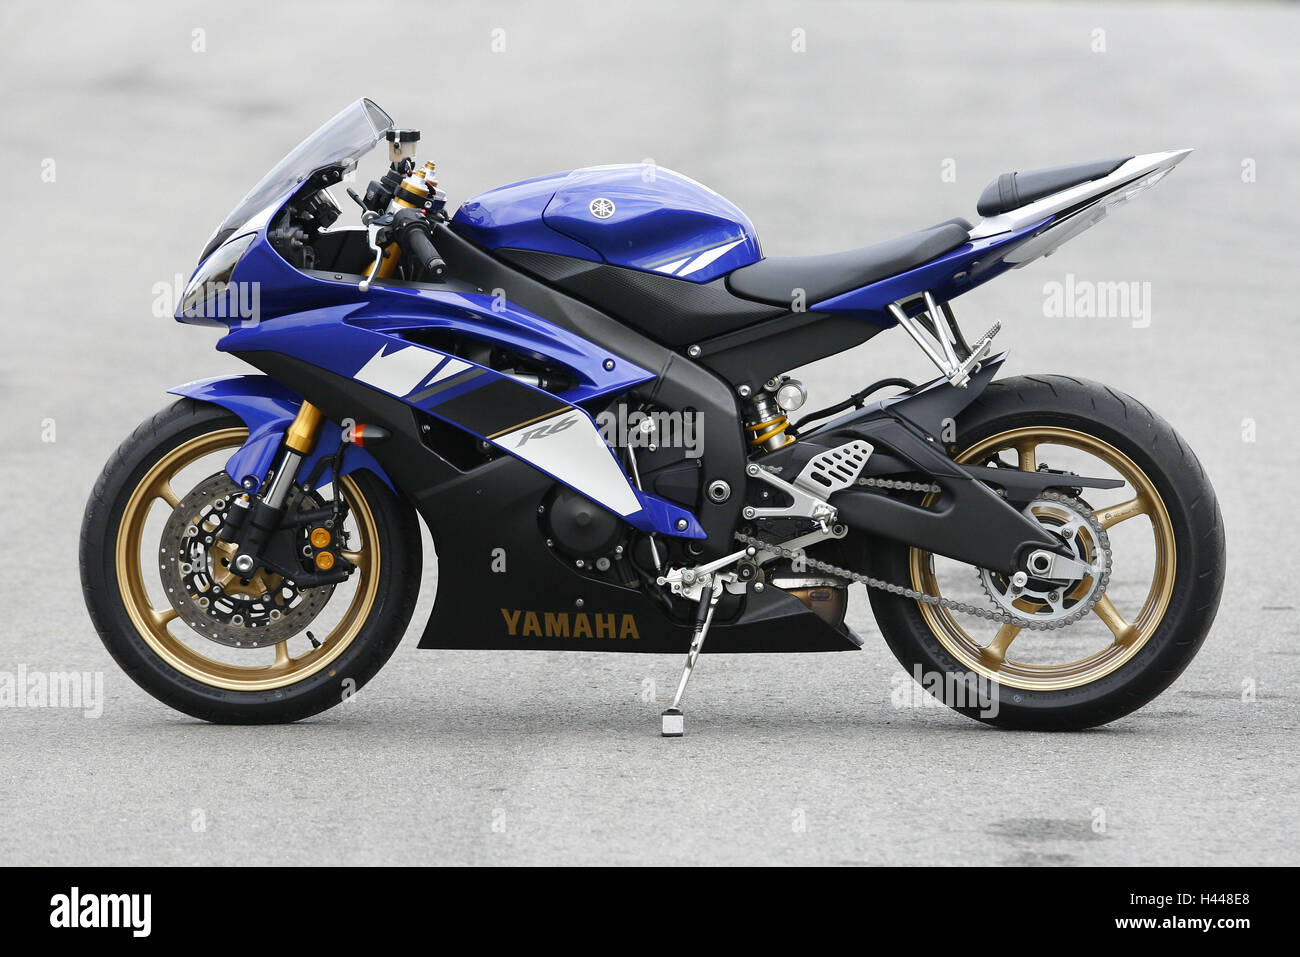 Motorcycle, Yamaha R6, supersportsman, standard, side view, Stock Photo